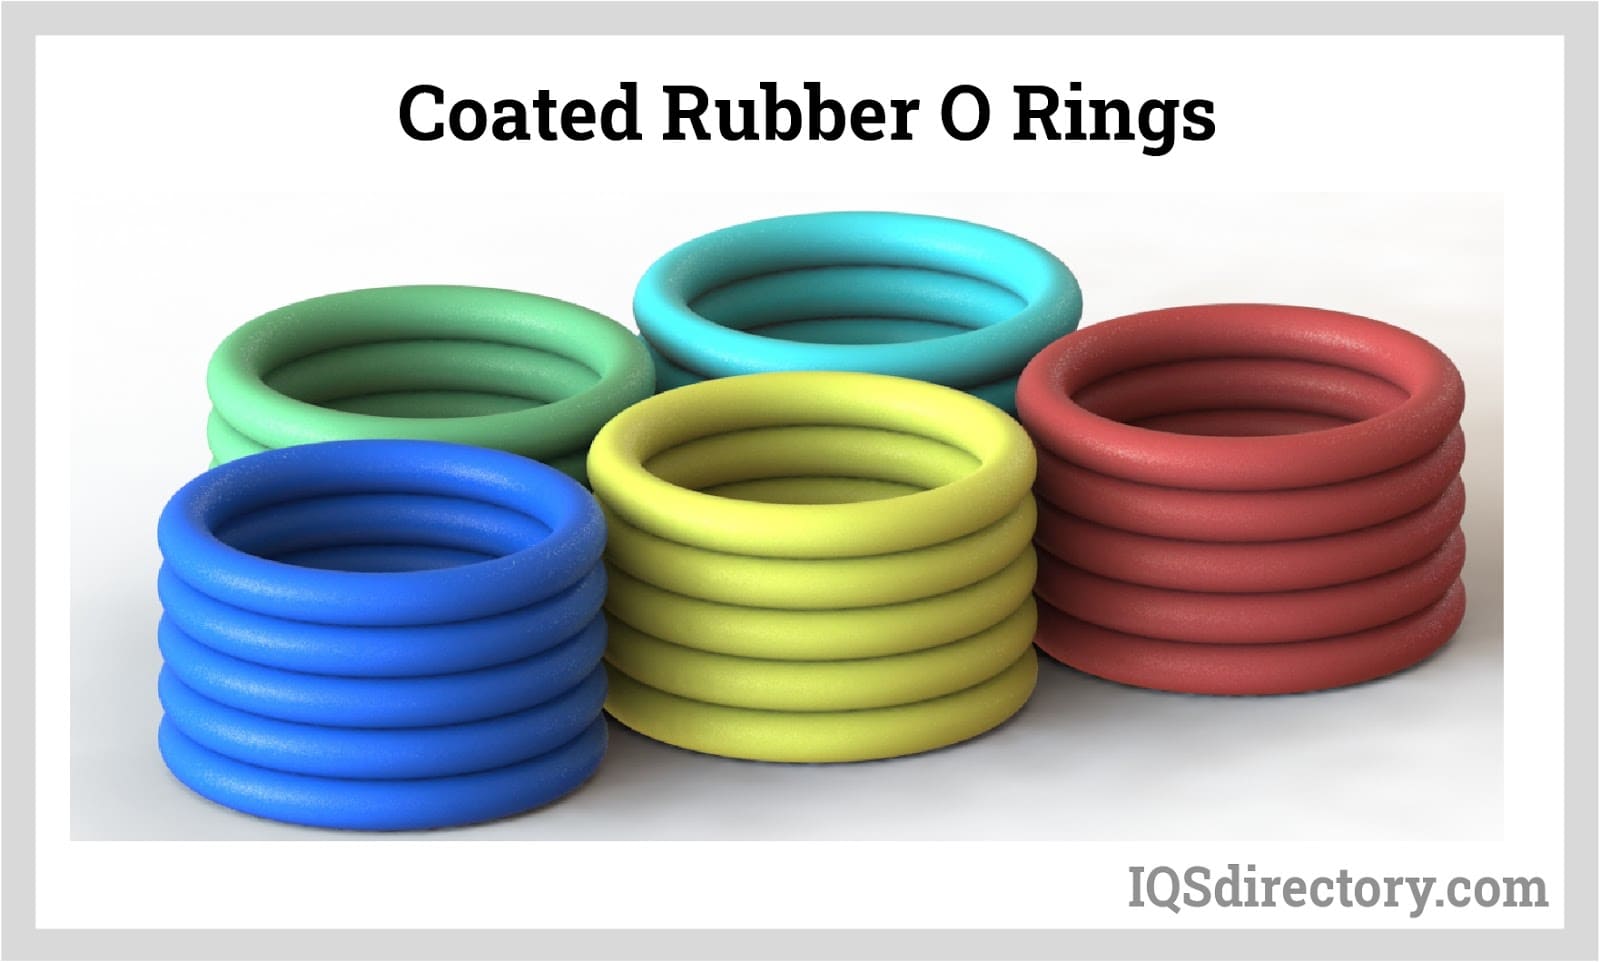 Coated Rubber O Rings